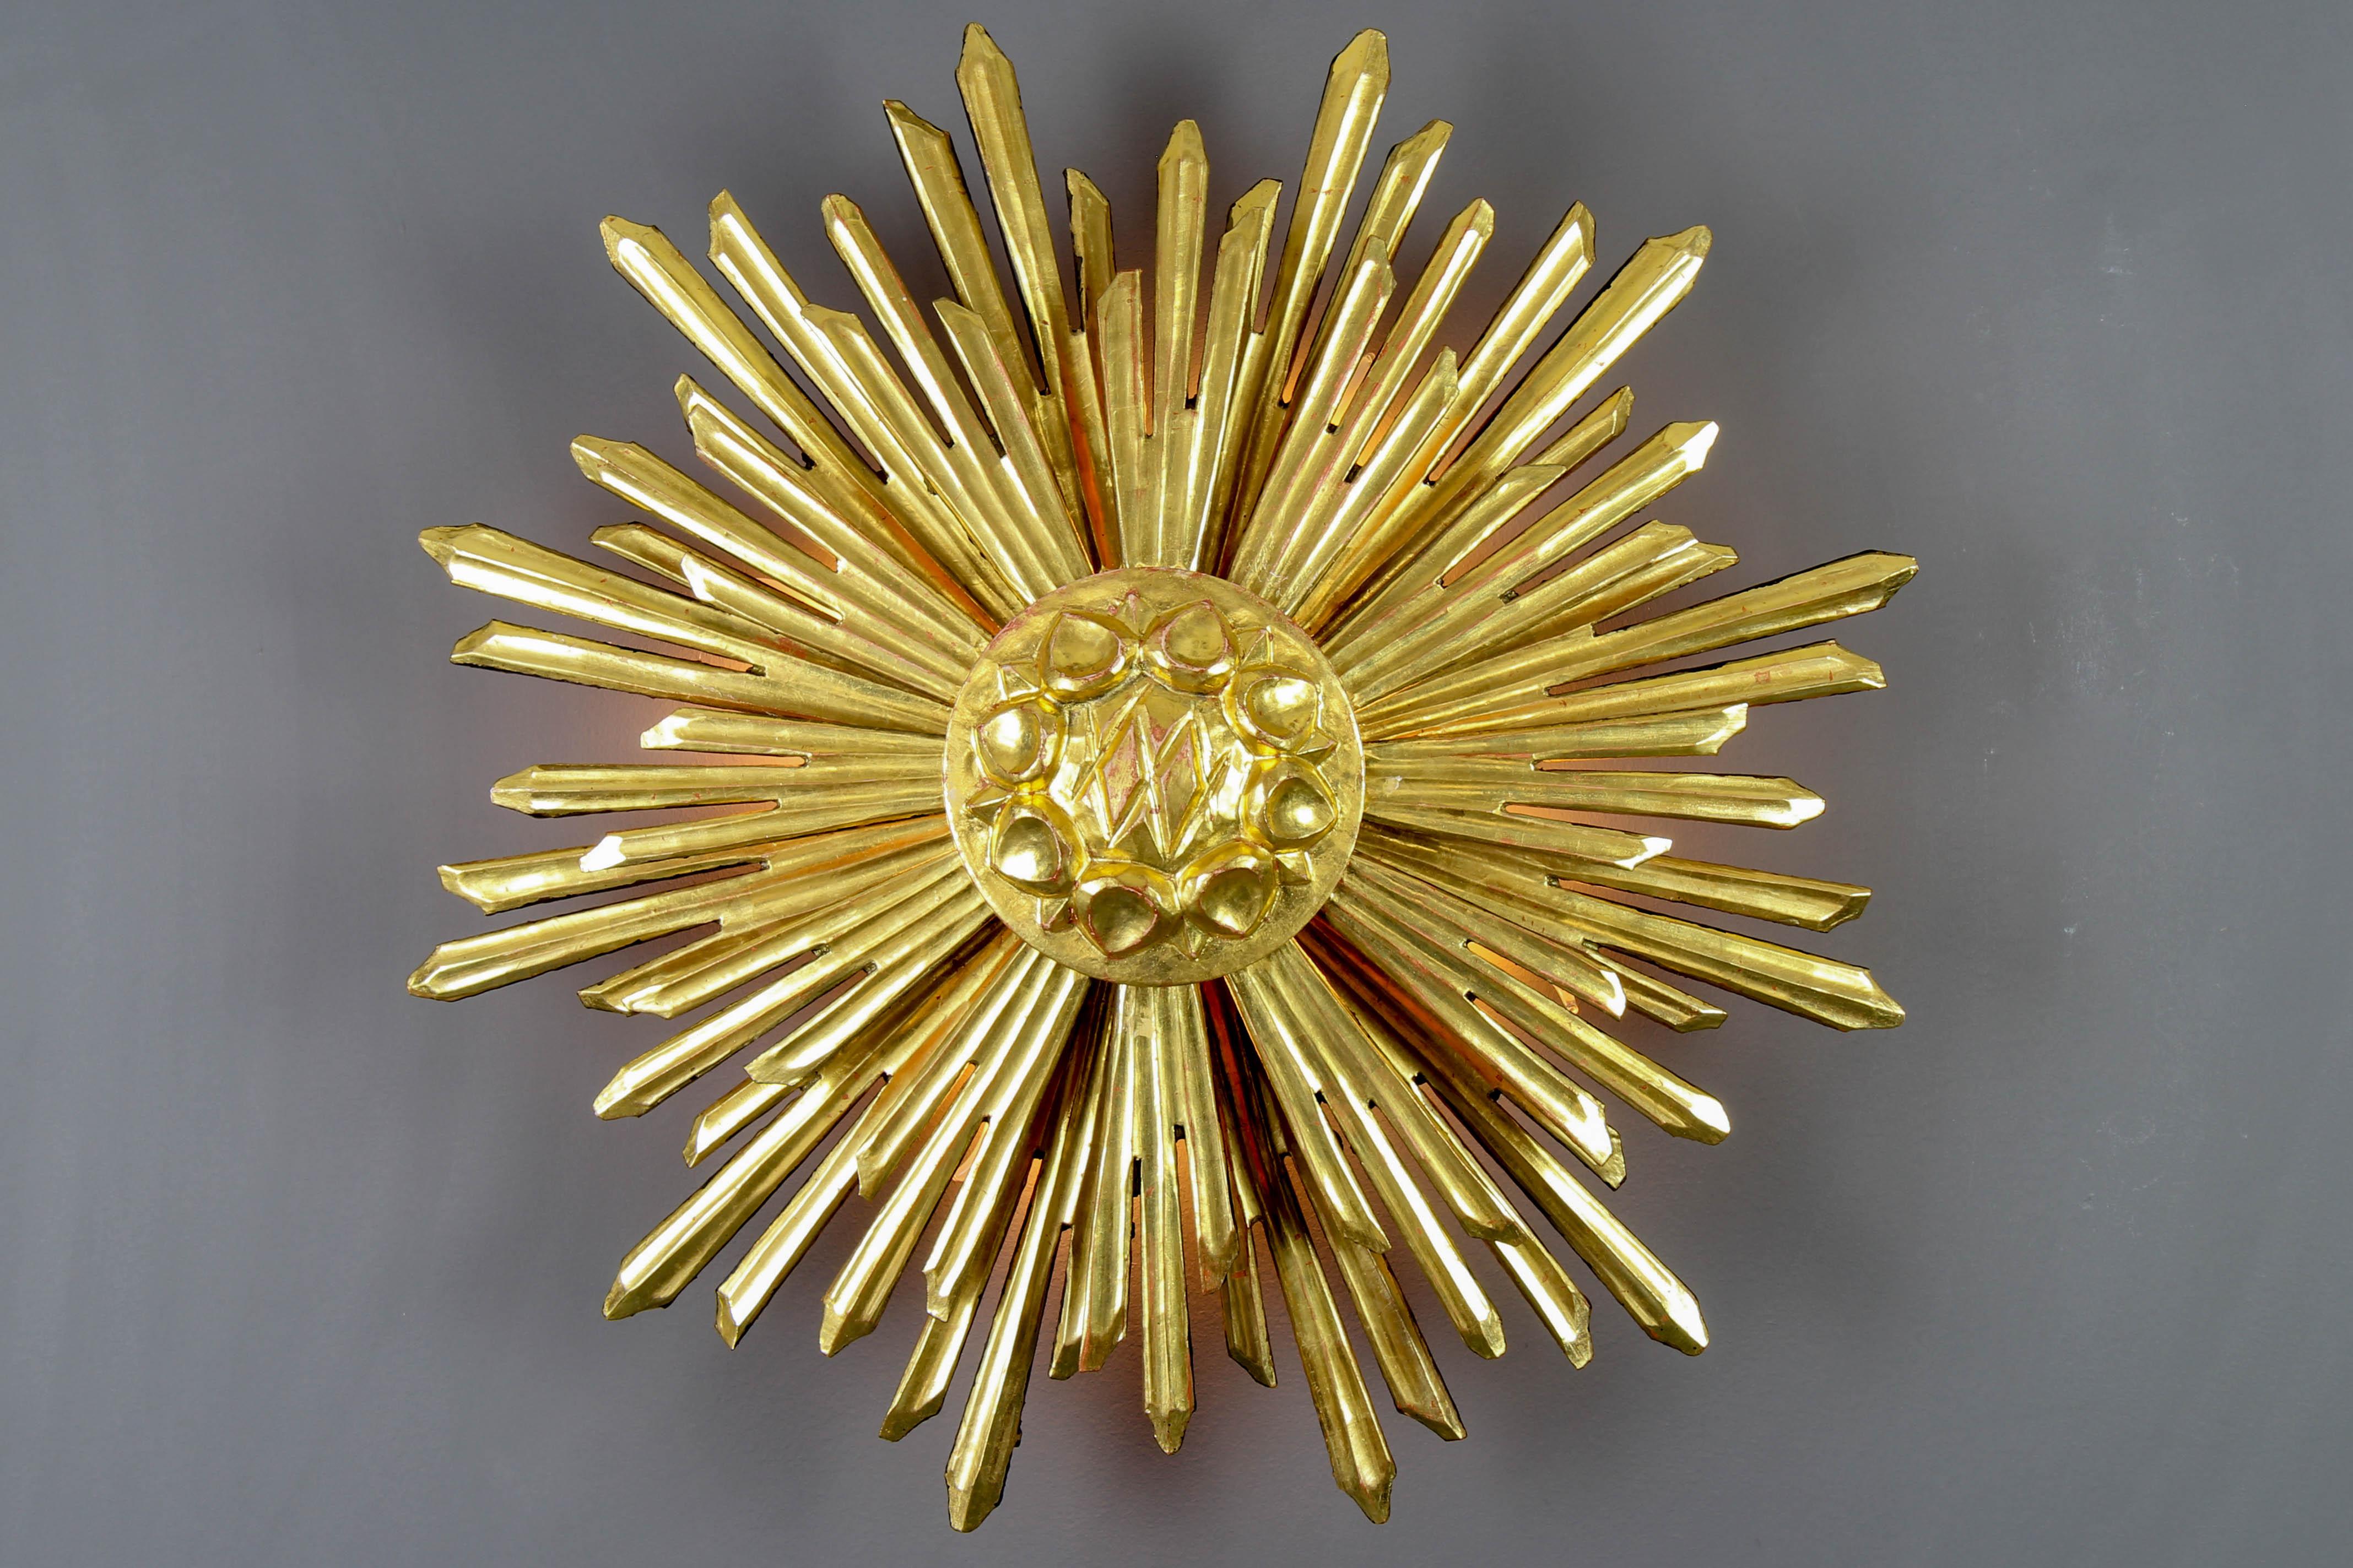 Large gilded wood backlit sunburst wall light, the 1930s
An impressive and beautiful gilded pine wood sunburst-shaped wall light with rays in two layers. The light backlit from four light points is warm and atmospheric and it emanates a beautiful